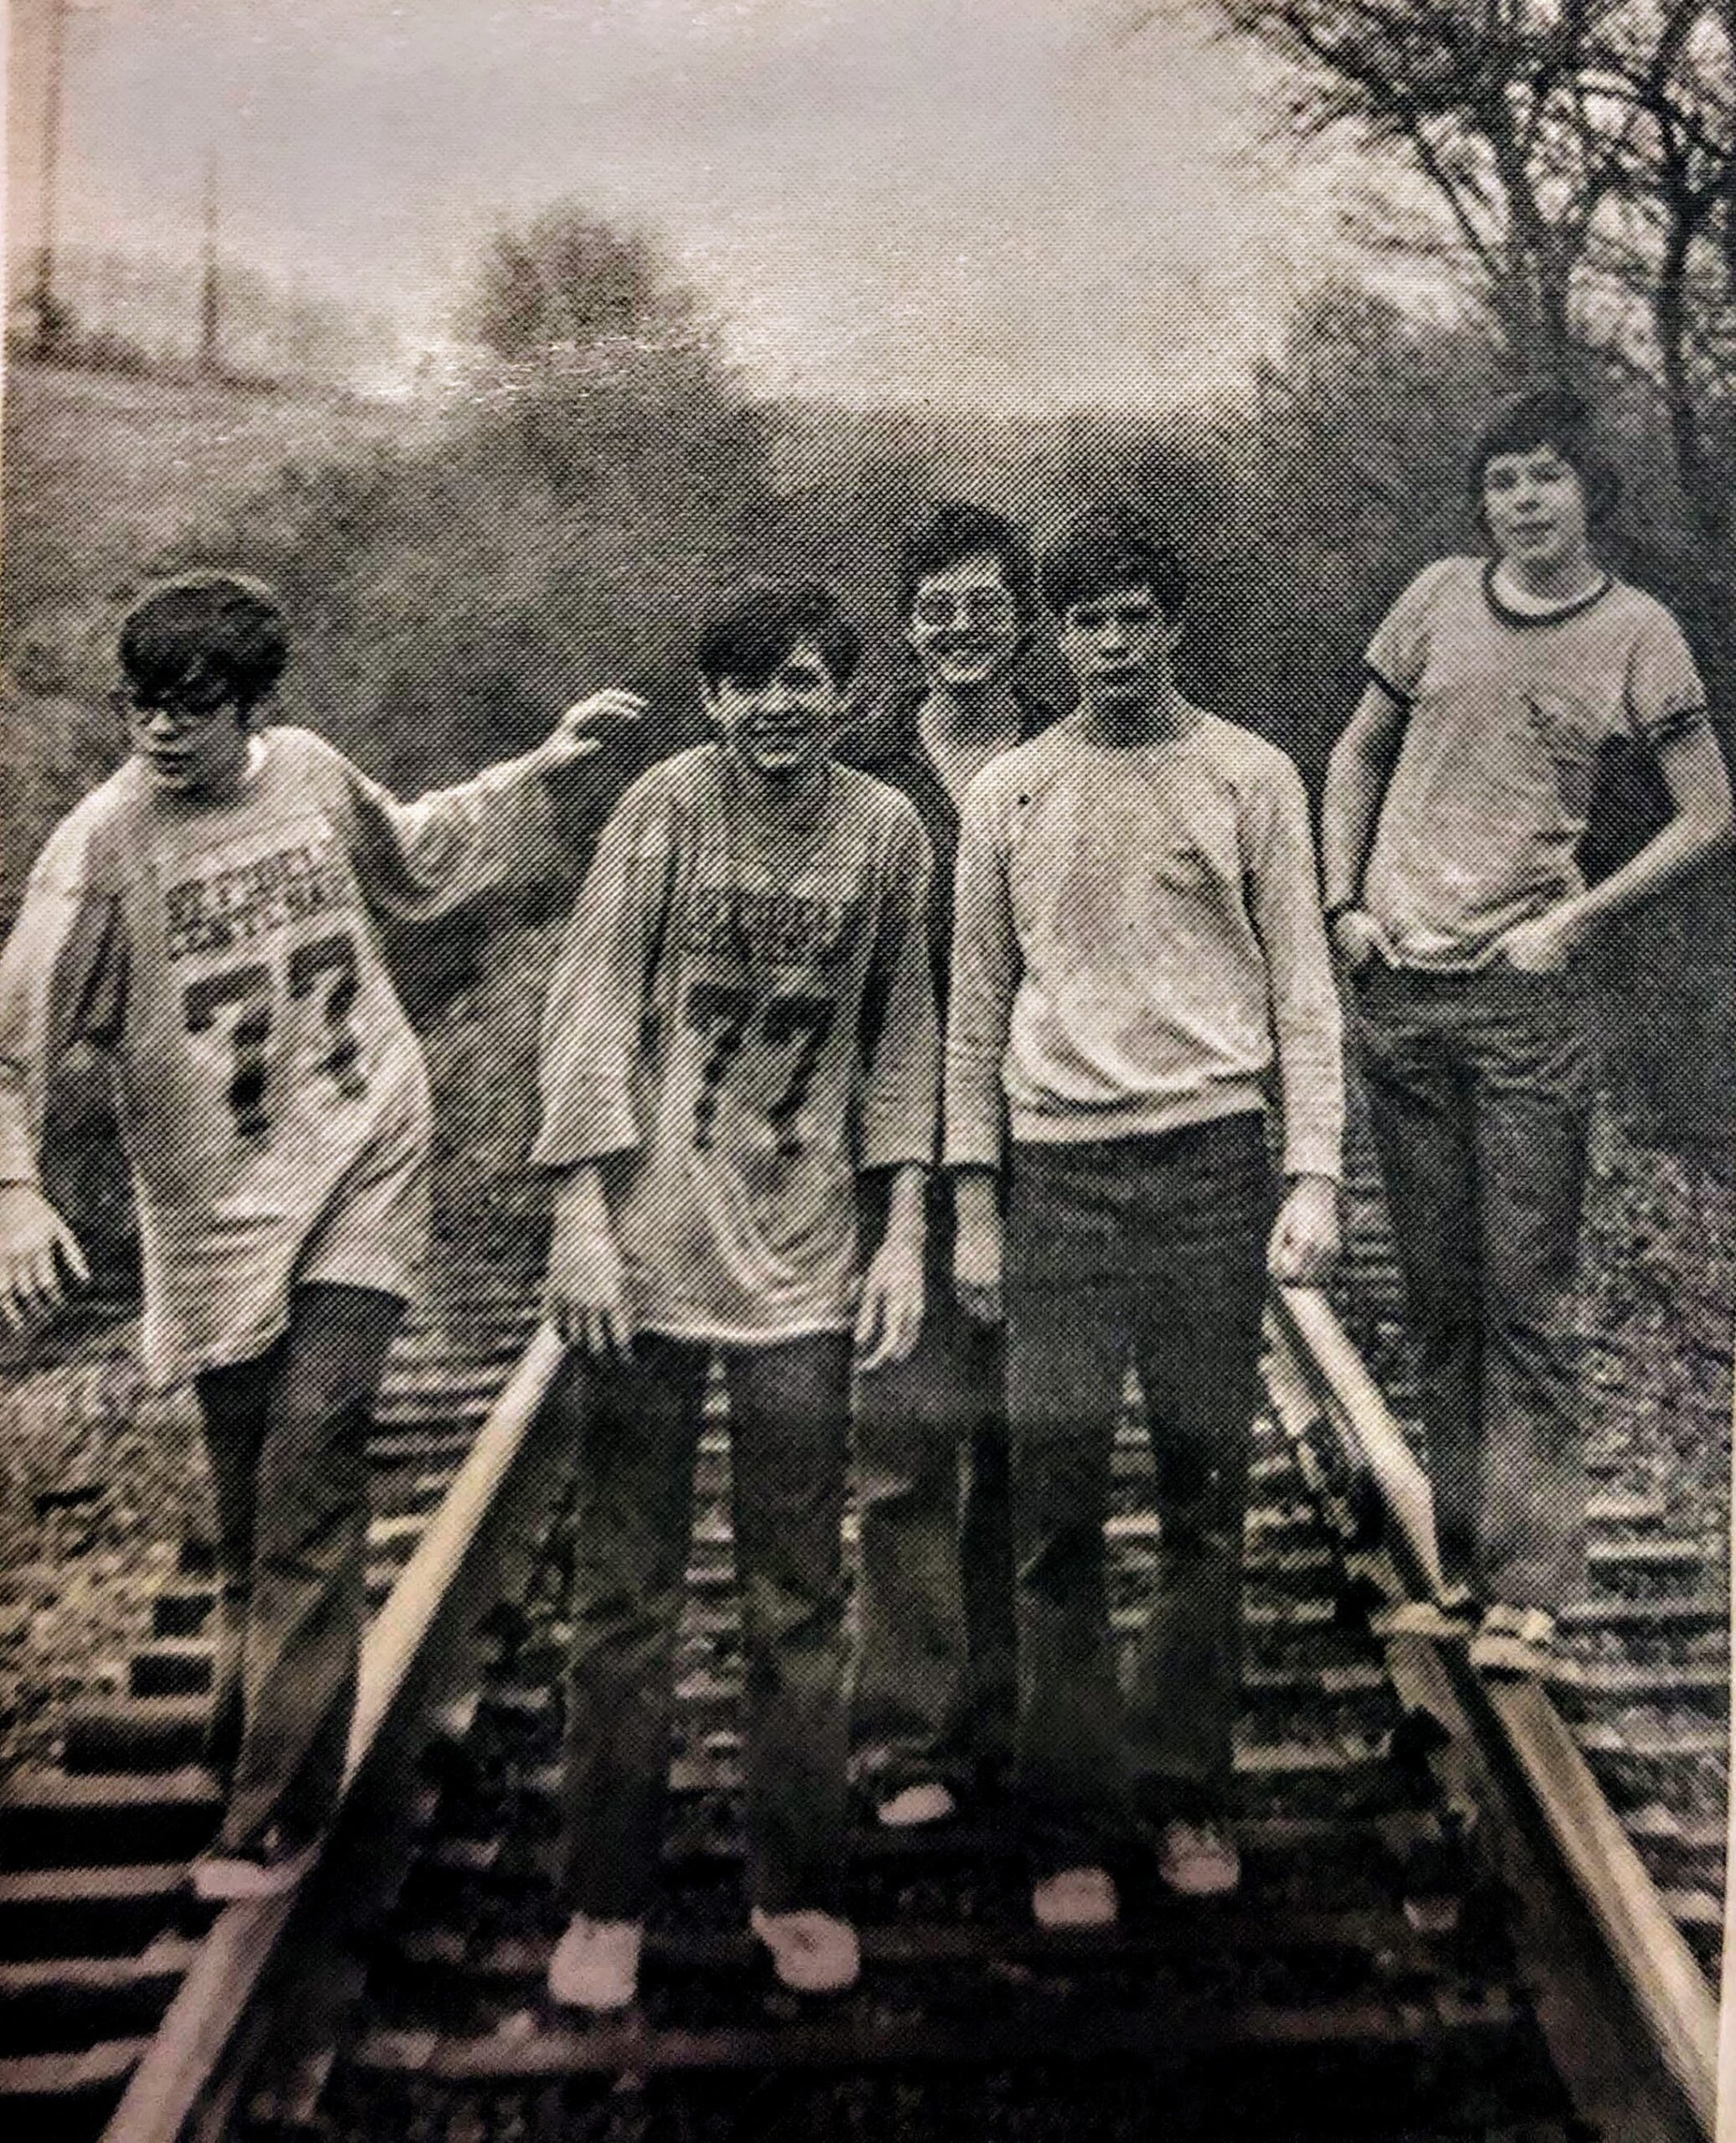 Boys on the RR tracks in Herman, PA.